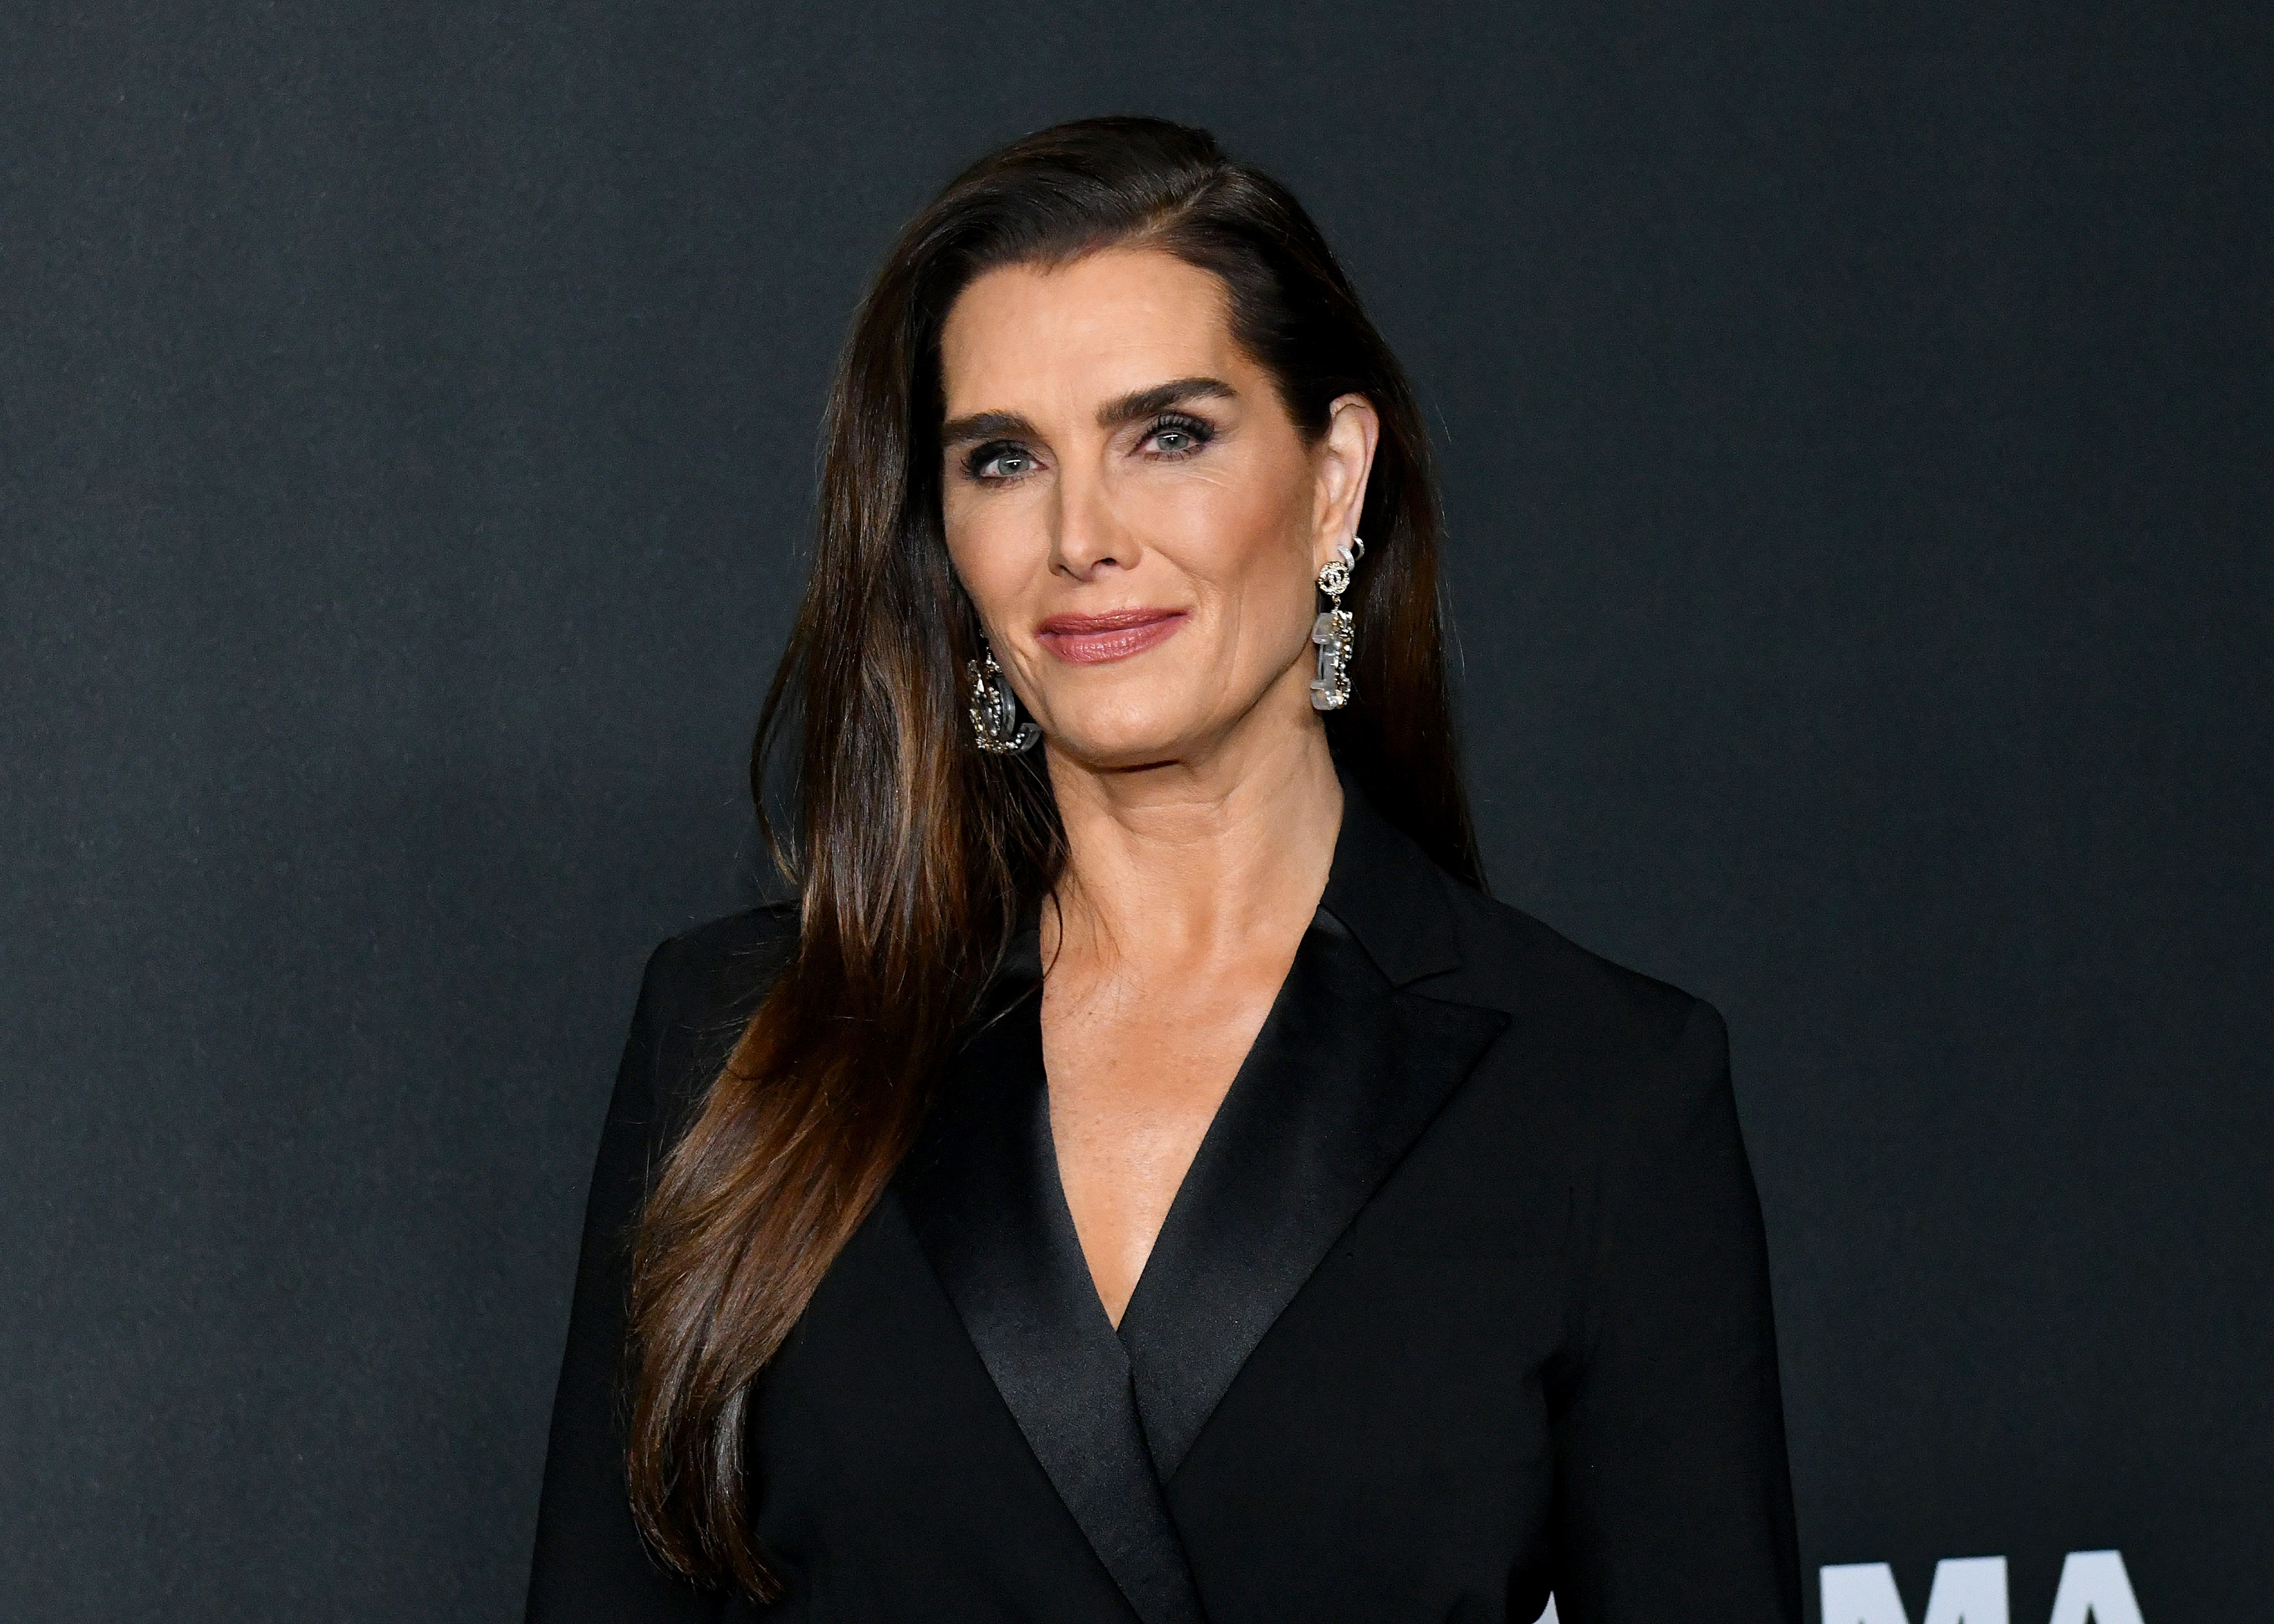 Brooke Shields at MoMA's Twelfth Annual Film Benefit Presented By CHANEL Honoring Laura Dern on November 12, 2019. | Photo: Getty Images